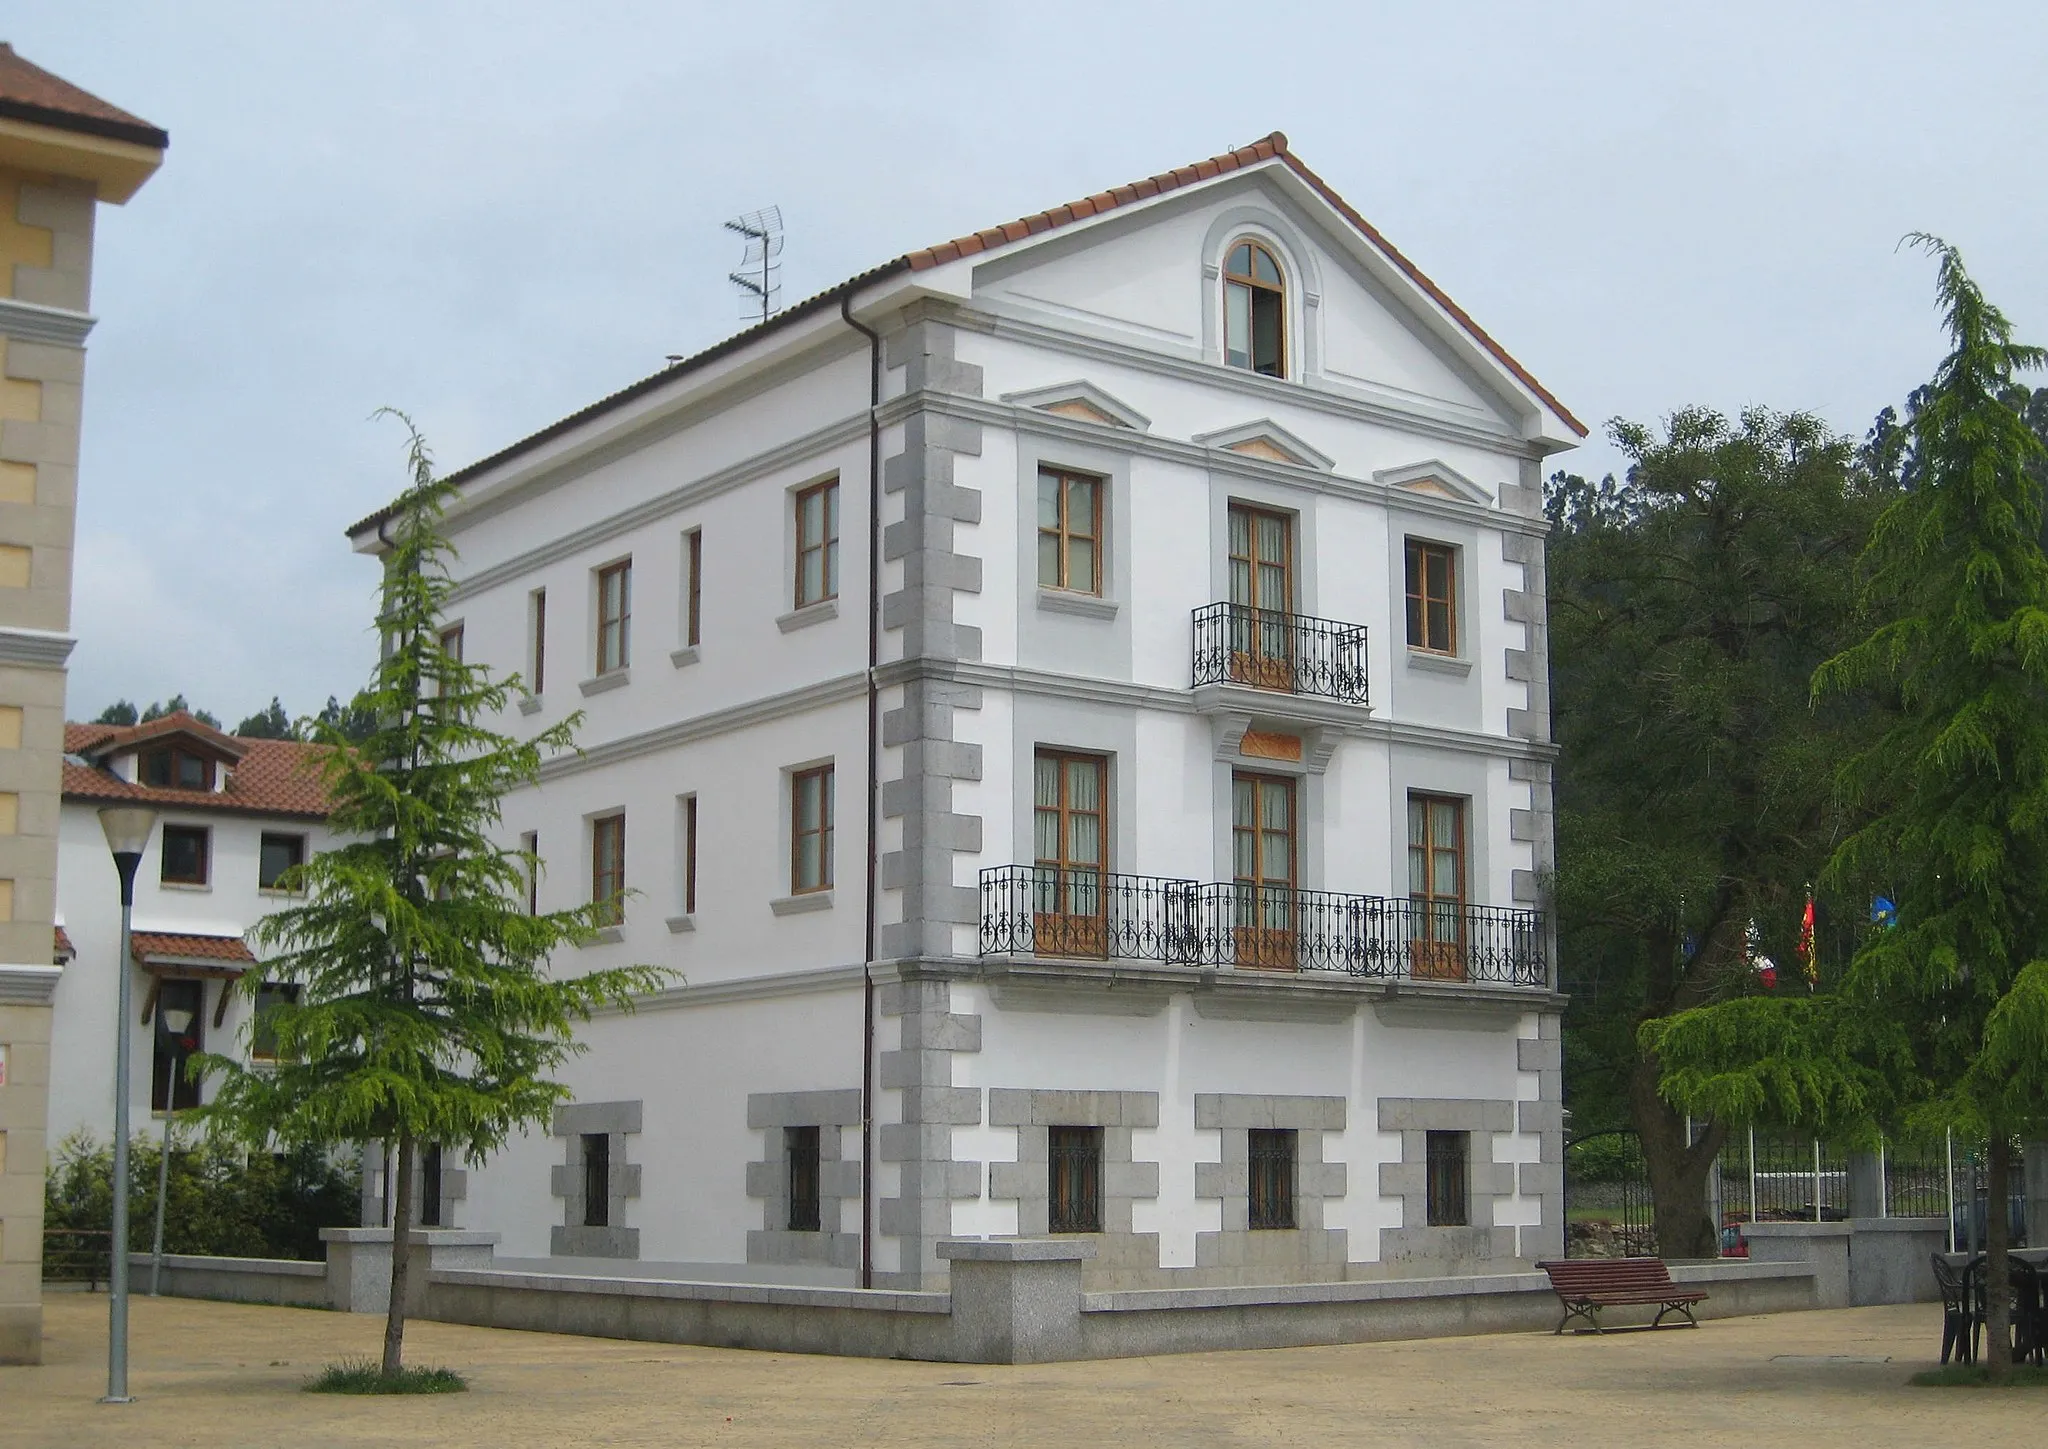 Photo showing: New building for the town hall of Guriezo at the village of El Puente, Cantabria, Spain